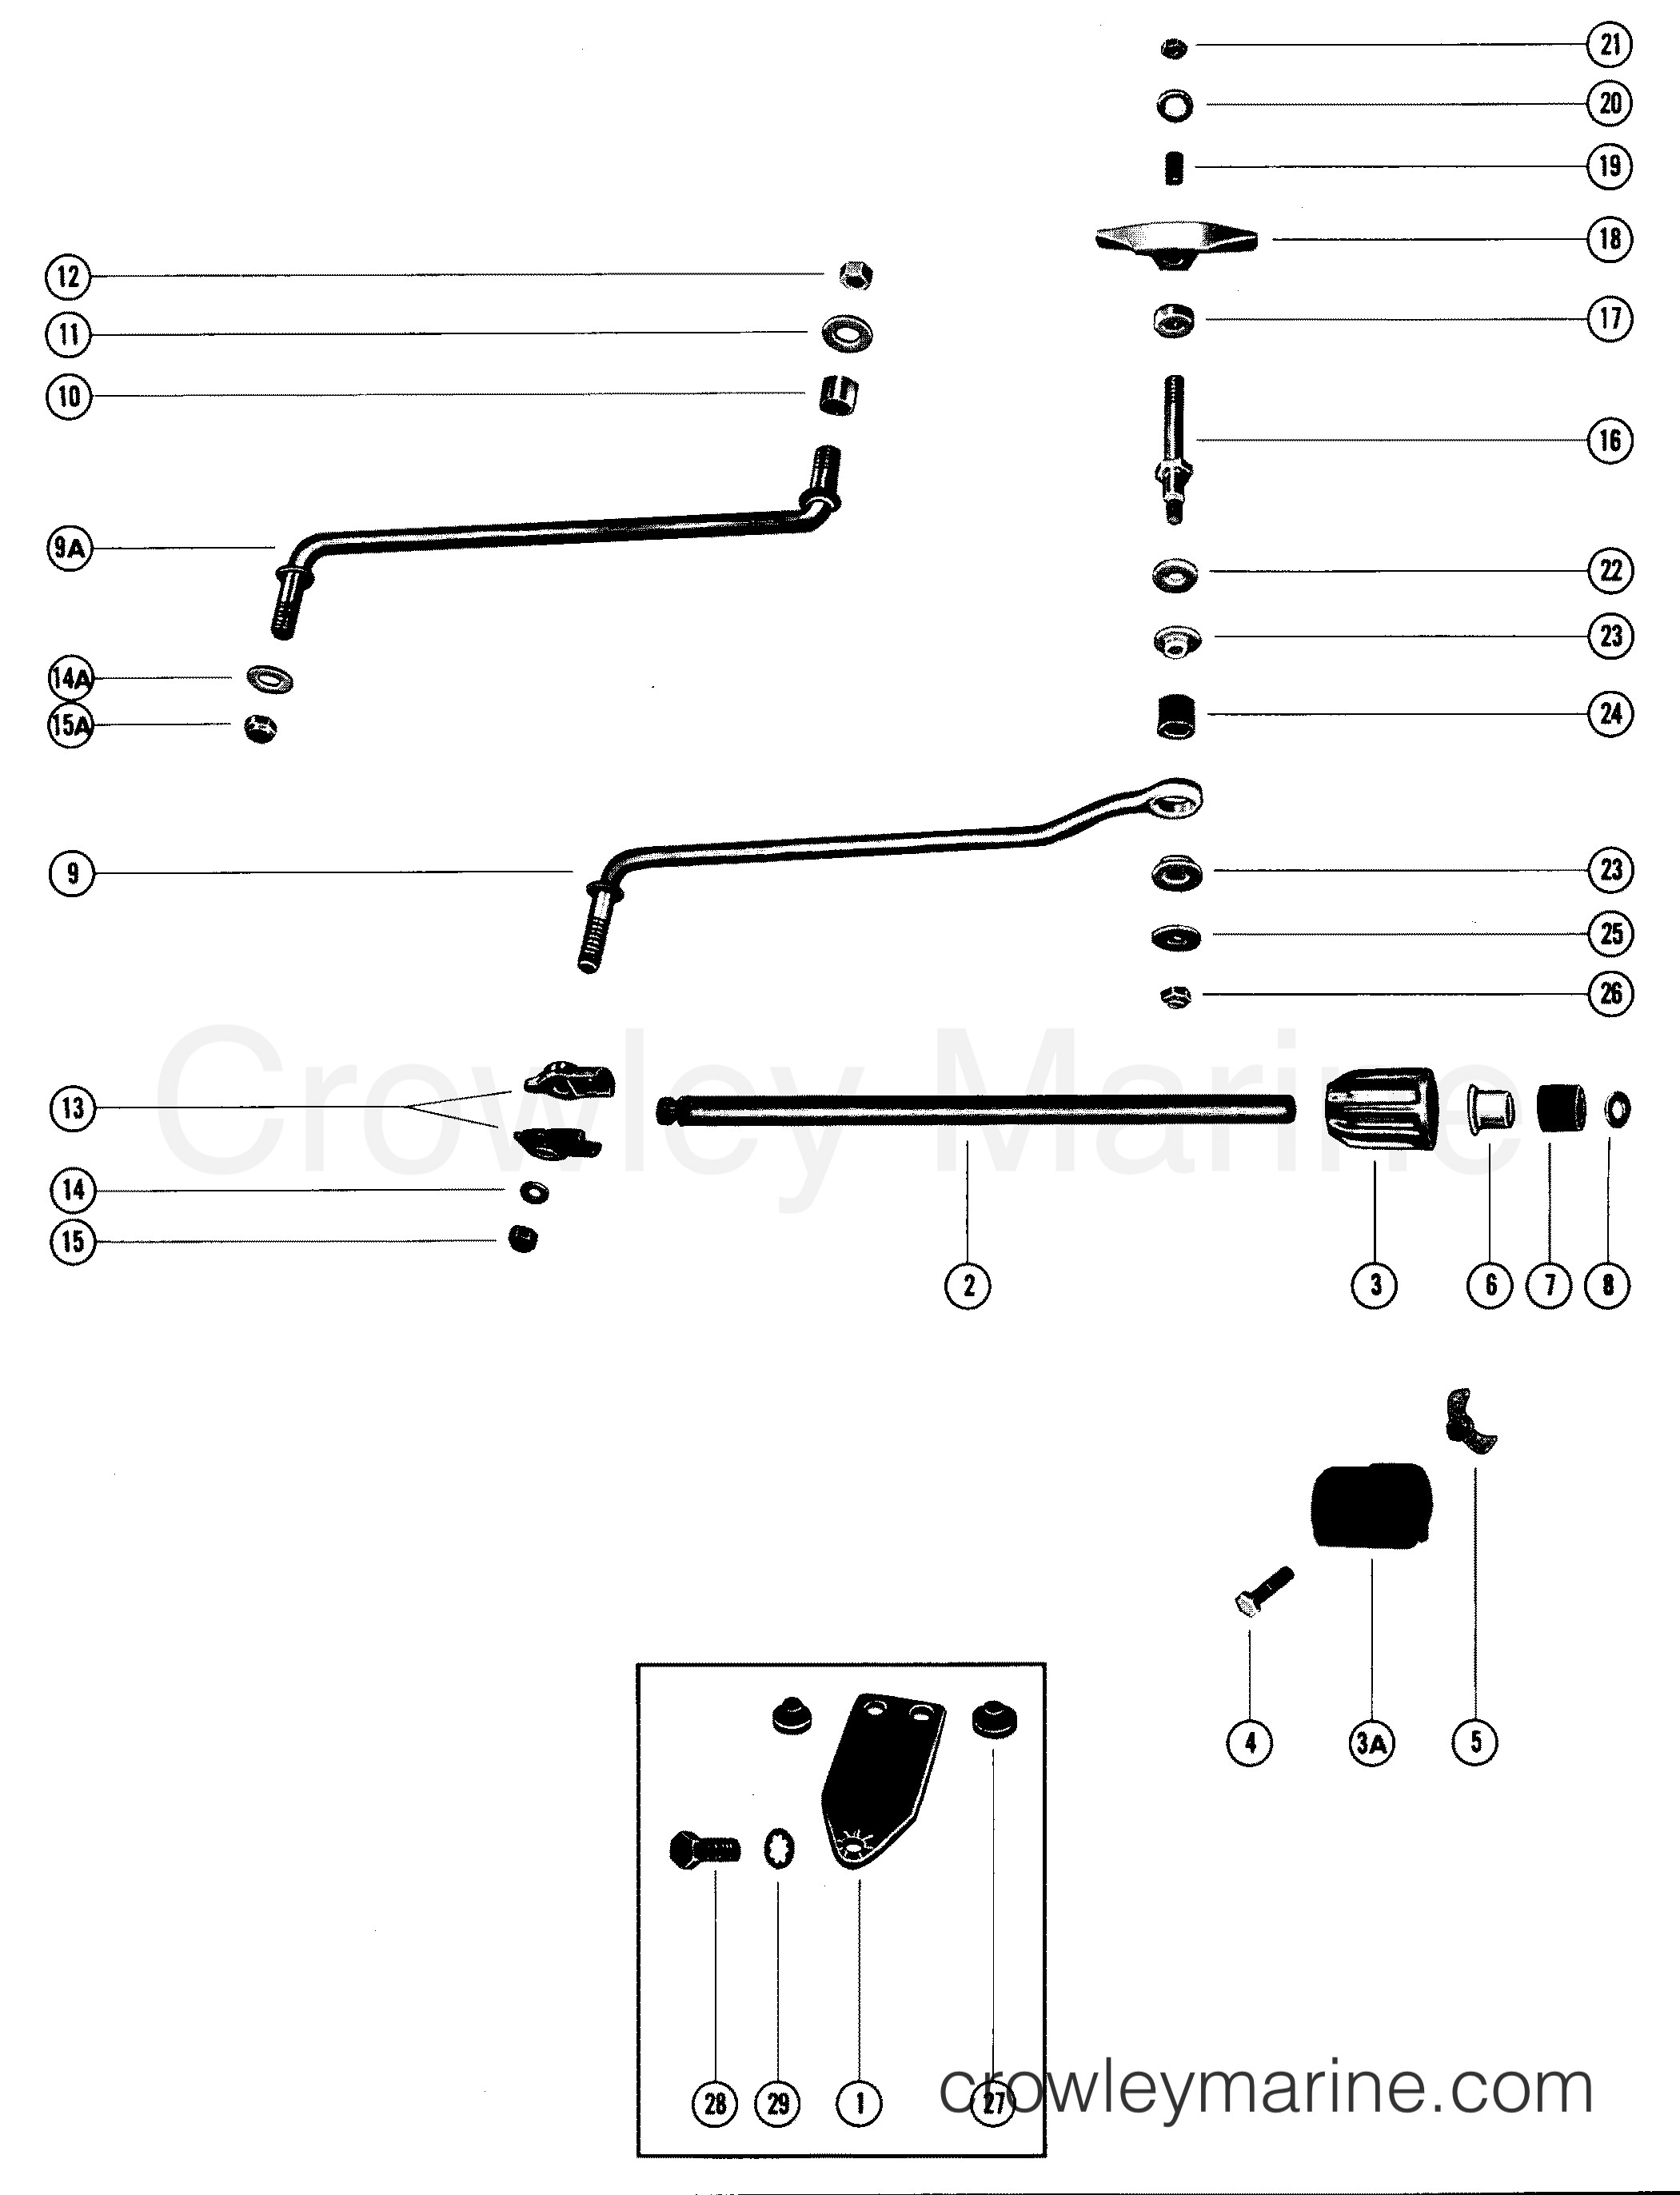 Power Steering Parts Diagram Co Pilot Replacement assembly Various Years Rigging Parts Power Of Power Steering Parts Diagram